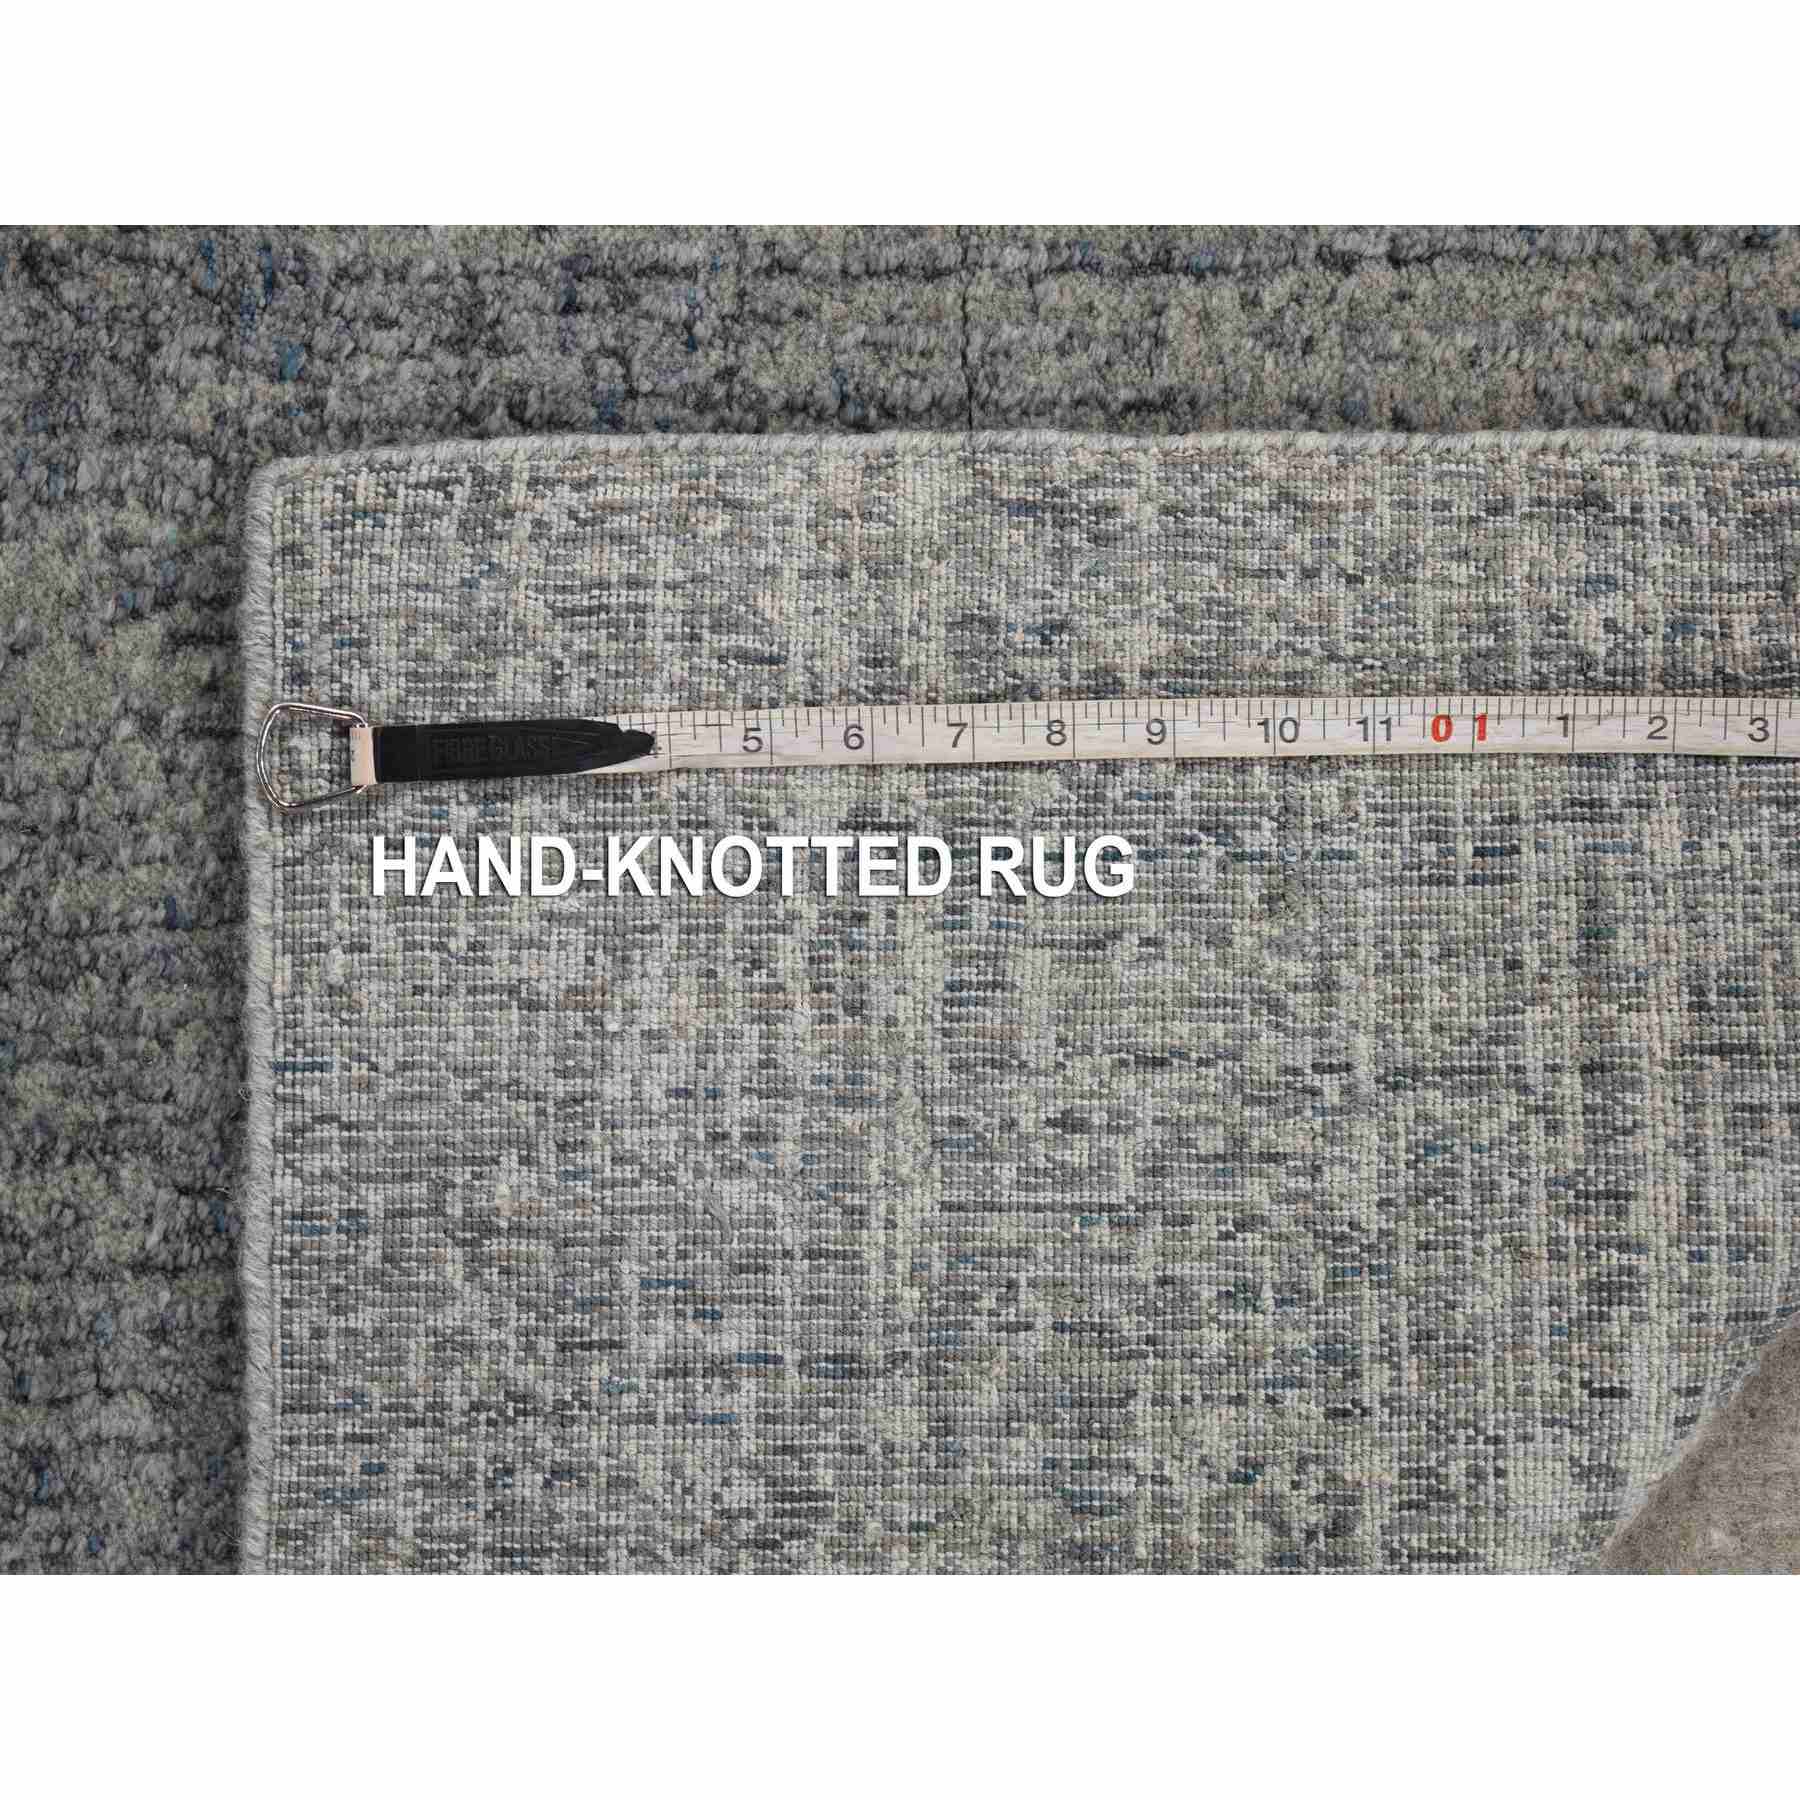 Modern-and-Contemporary-Hand-Loomed-Rug-401385